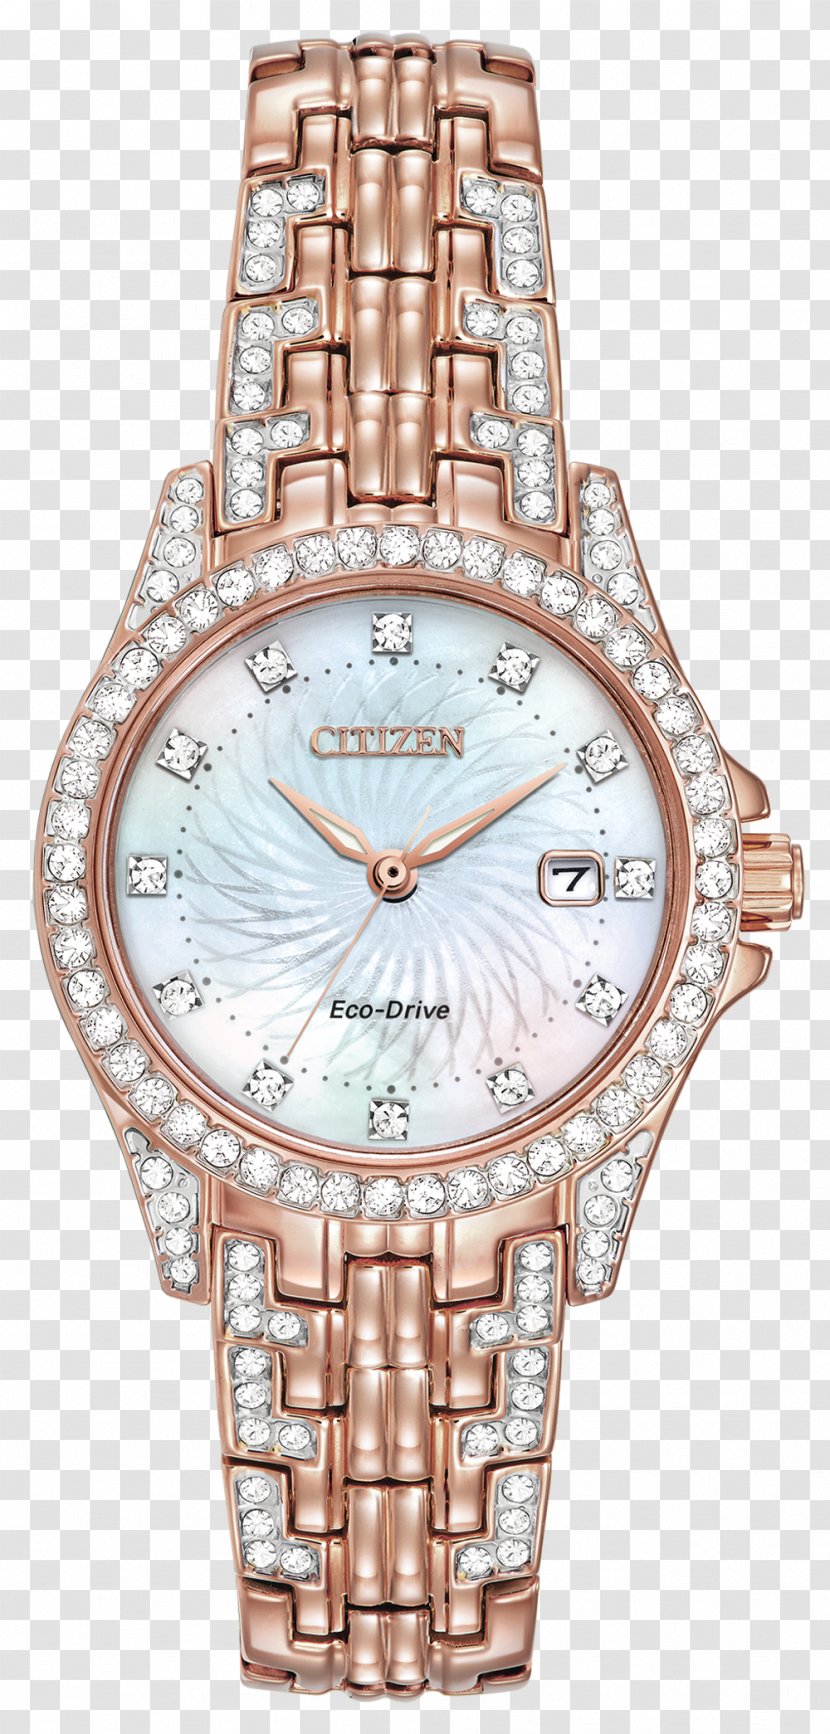 Eco-Drive Watch Citizen Holdings Jewellery Swarovski AG Transparent PNG